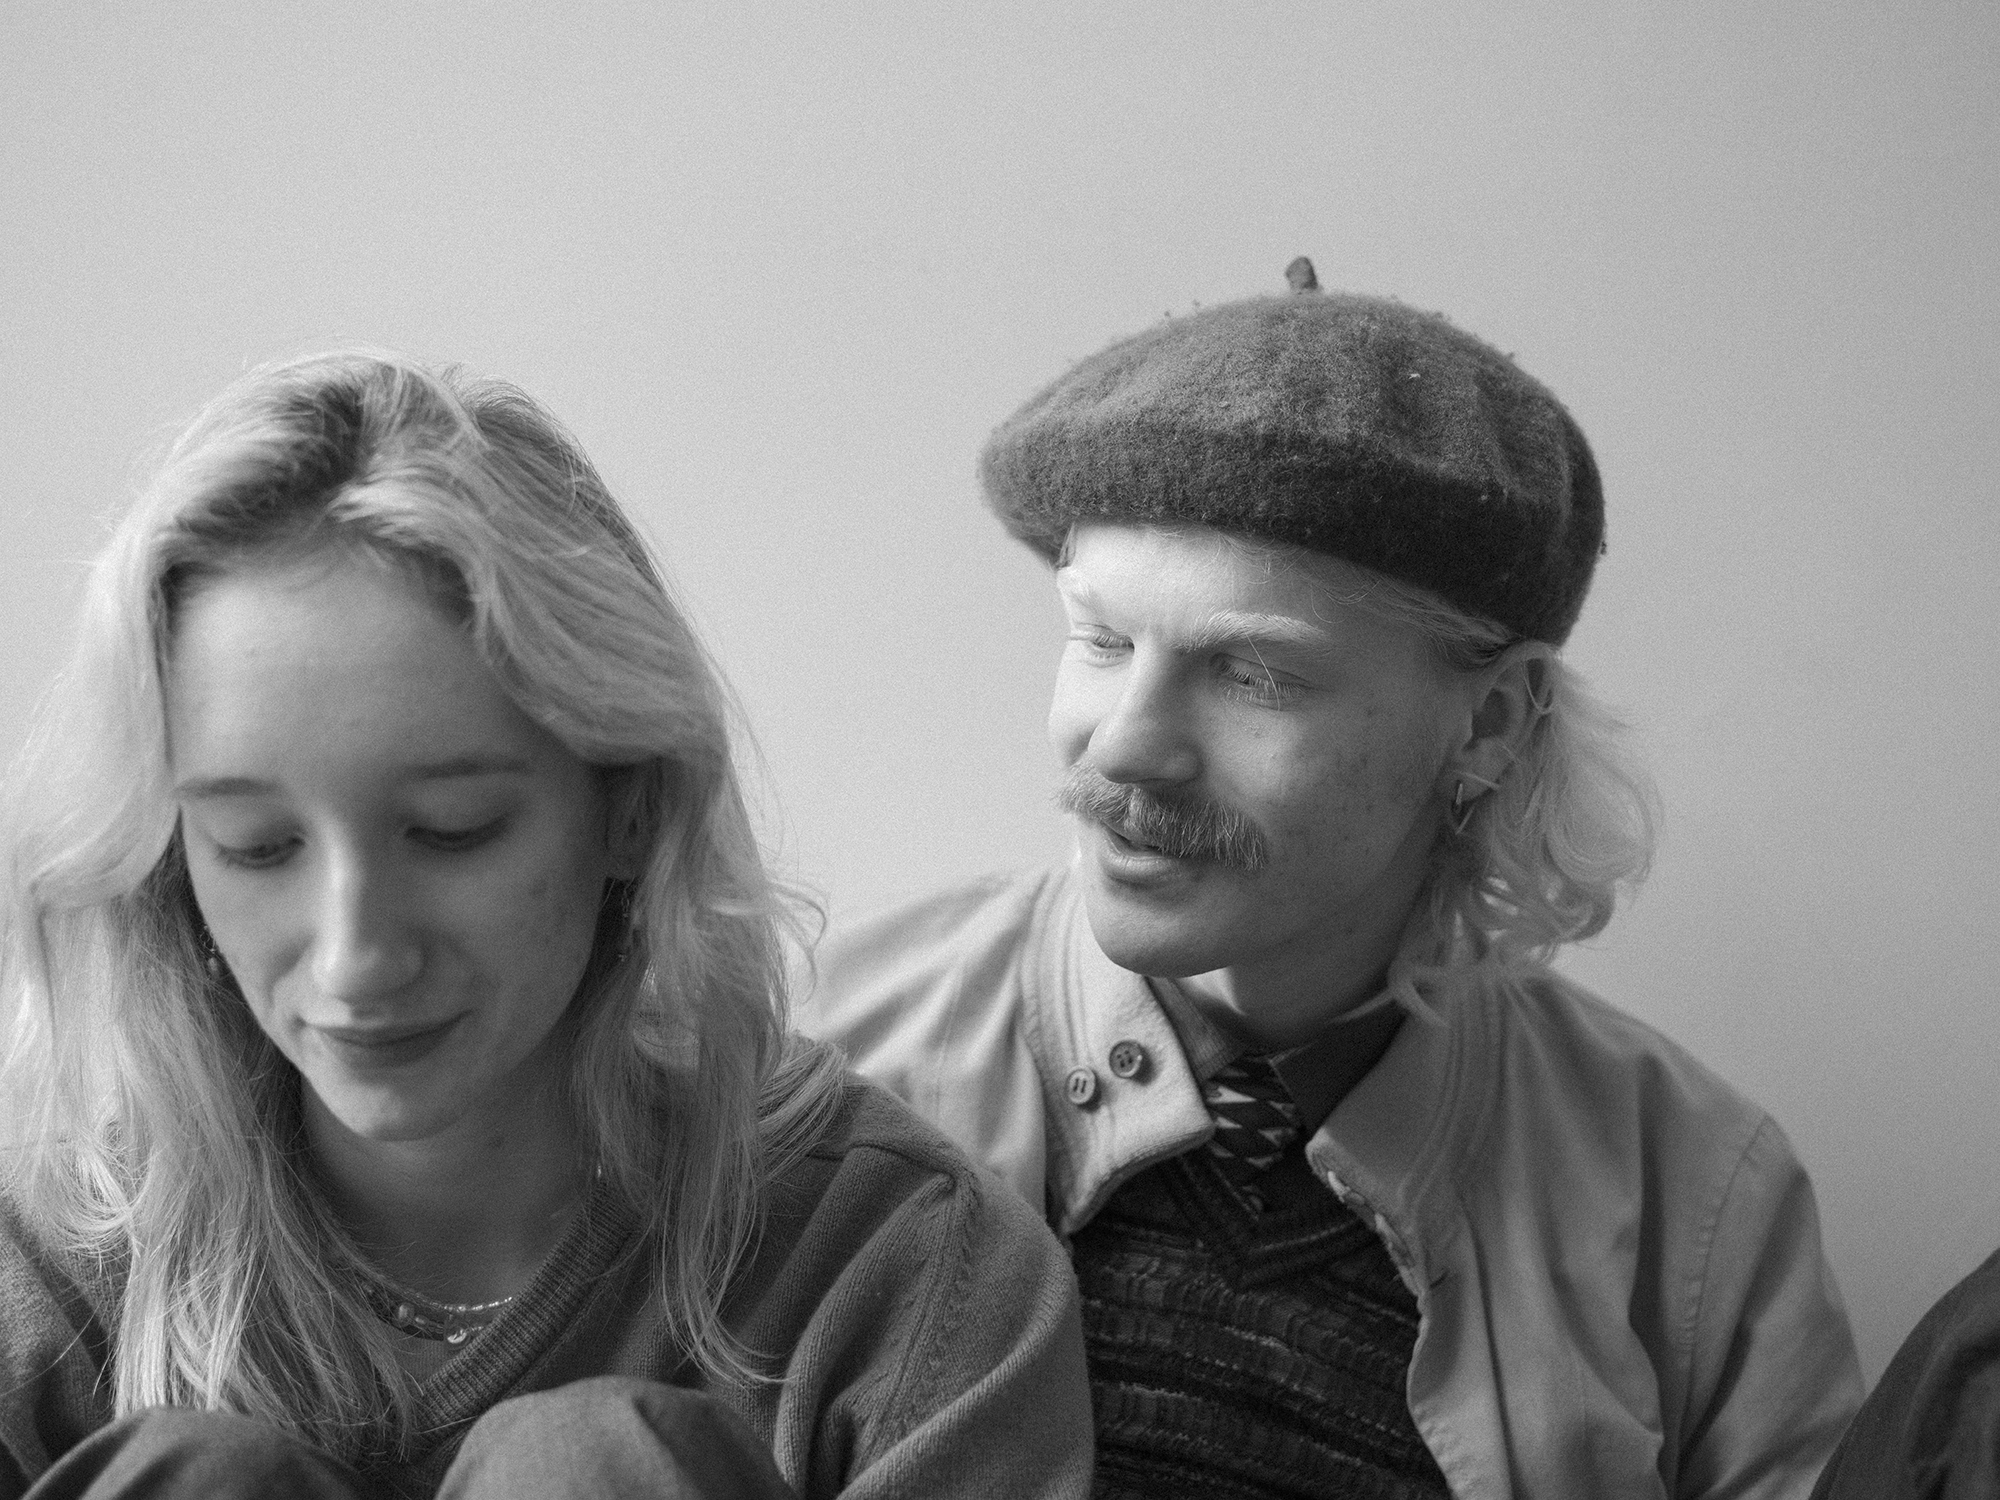 BA Photography work by Nicola Faye Bates showing a portrait of couple talking with each other.